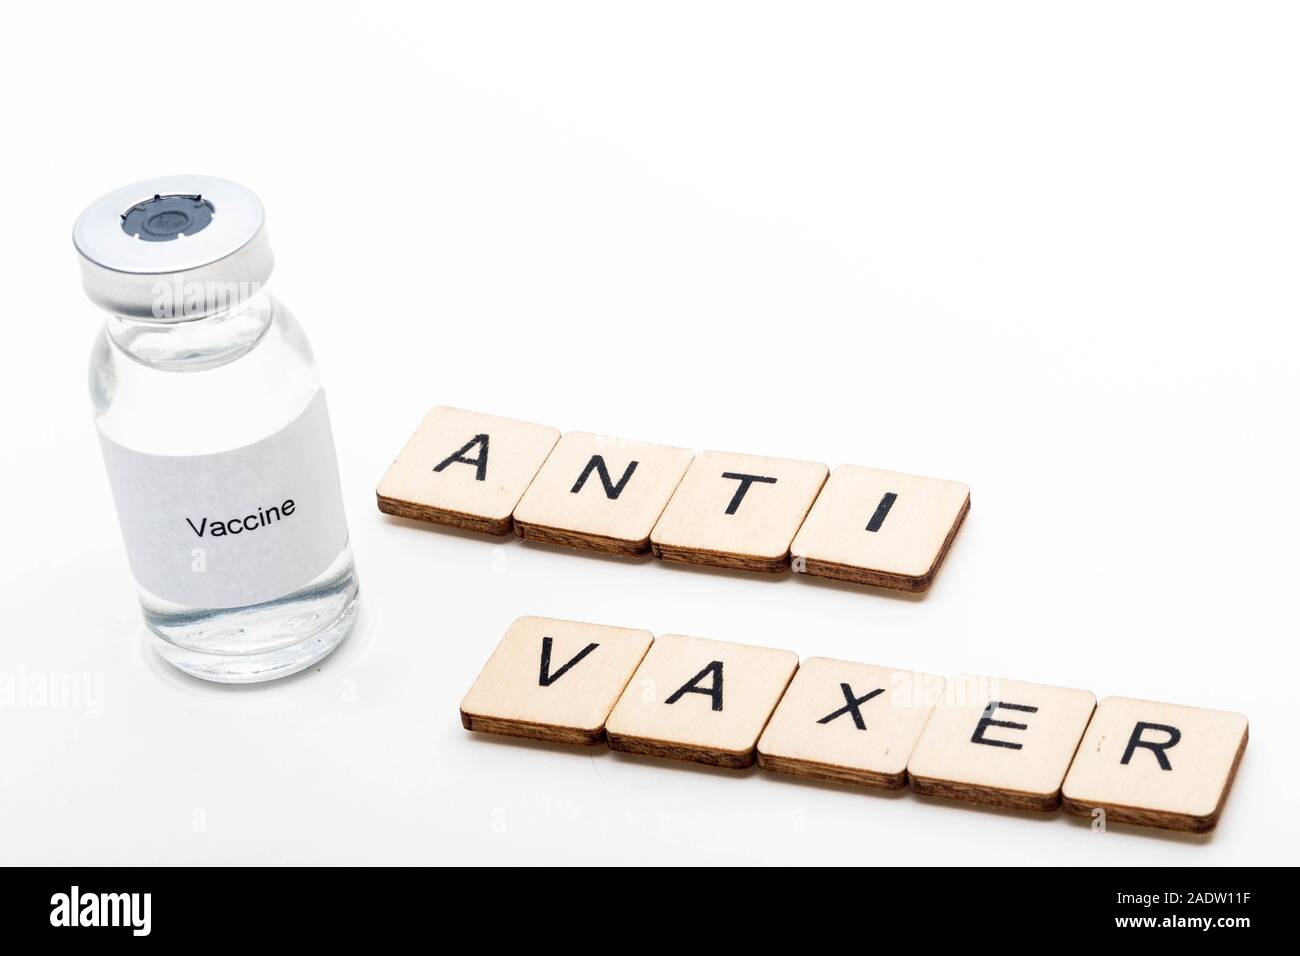 Vaccine concept showing a medical vial with a Vaccine label on a white background along with a sign reading Anti Vaxer Stock Photo